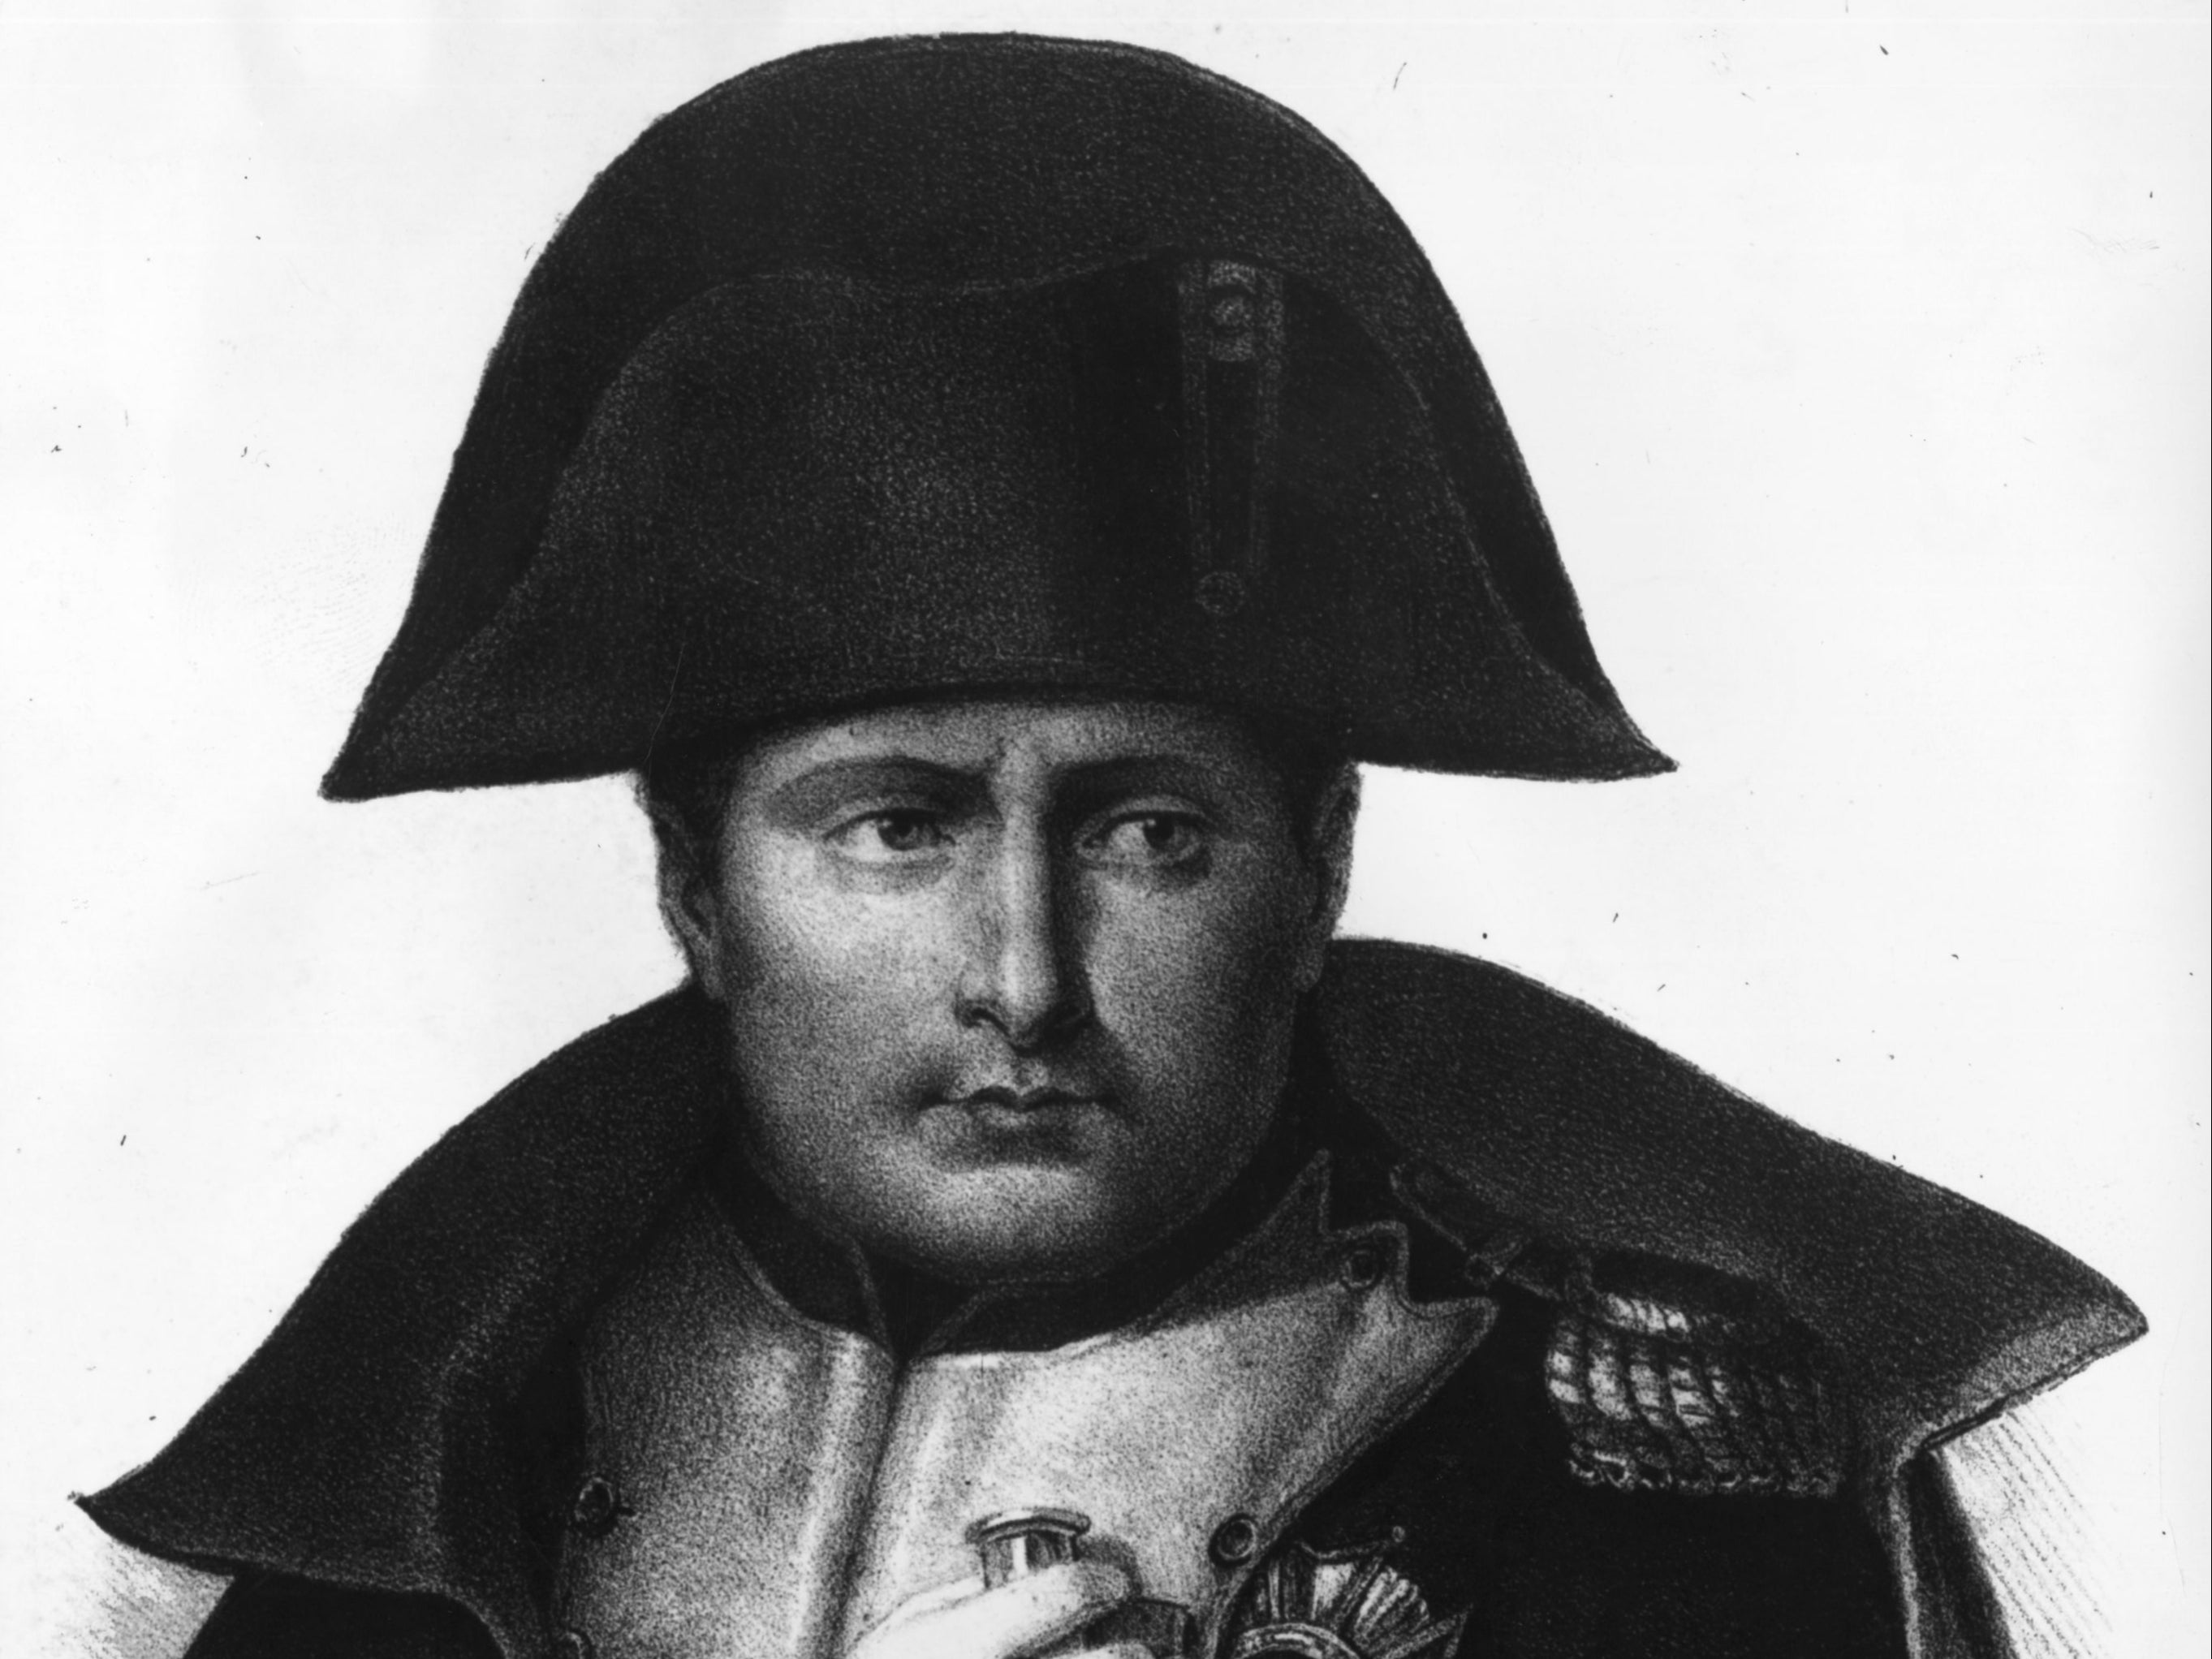 A painting of Bonaparte from around 1810